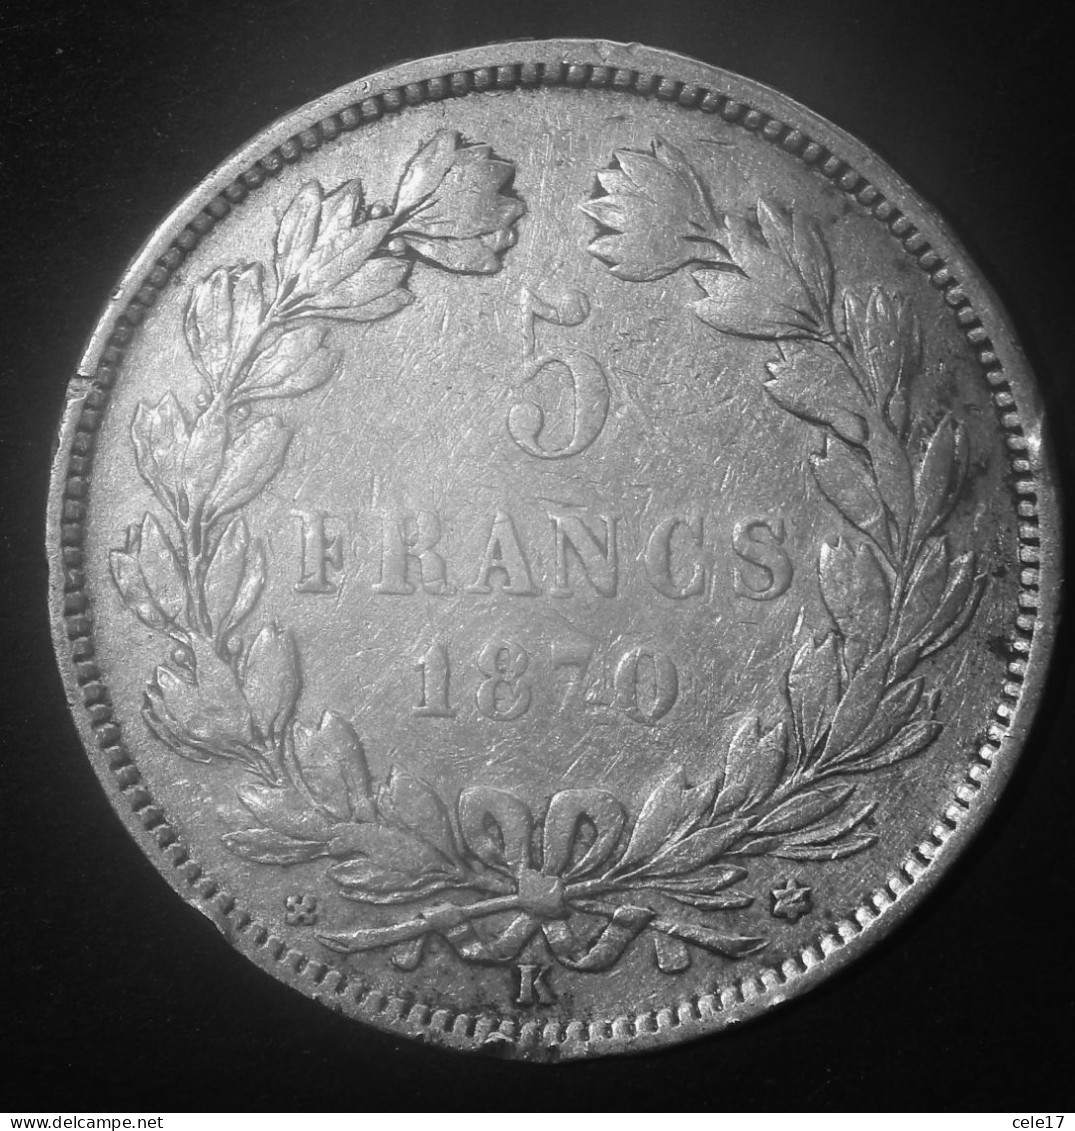 FRANCIA- CERES 5 FRANCHI 1870 ARGENTO- M/star- KM812.2 - 1870-1871 Government Of National Defense